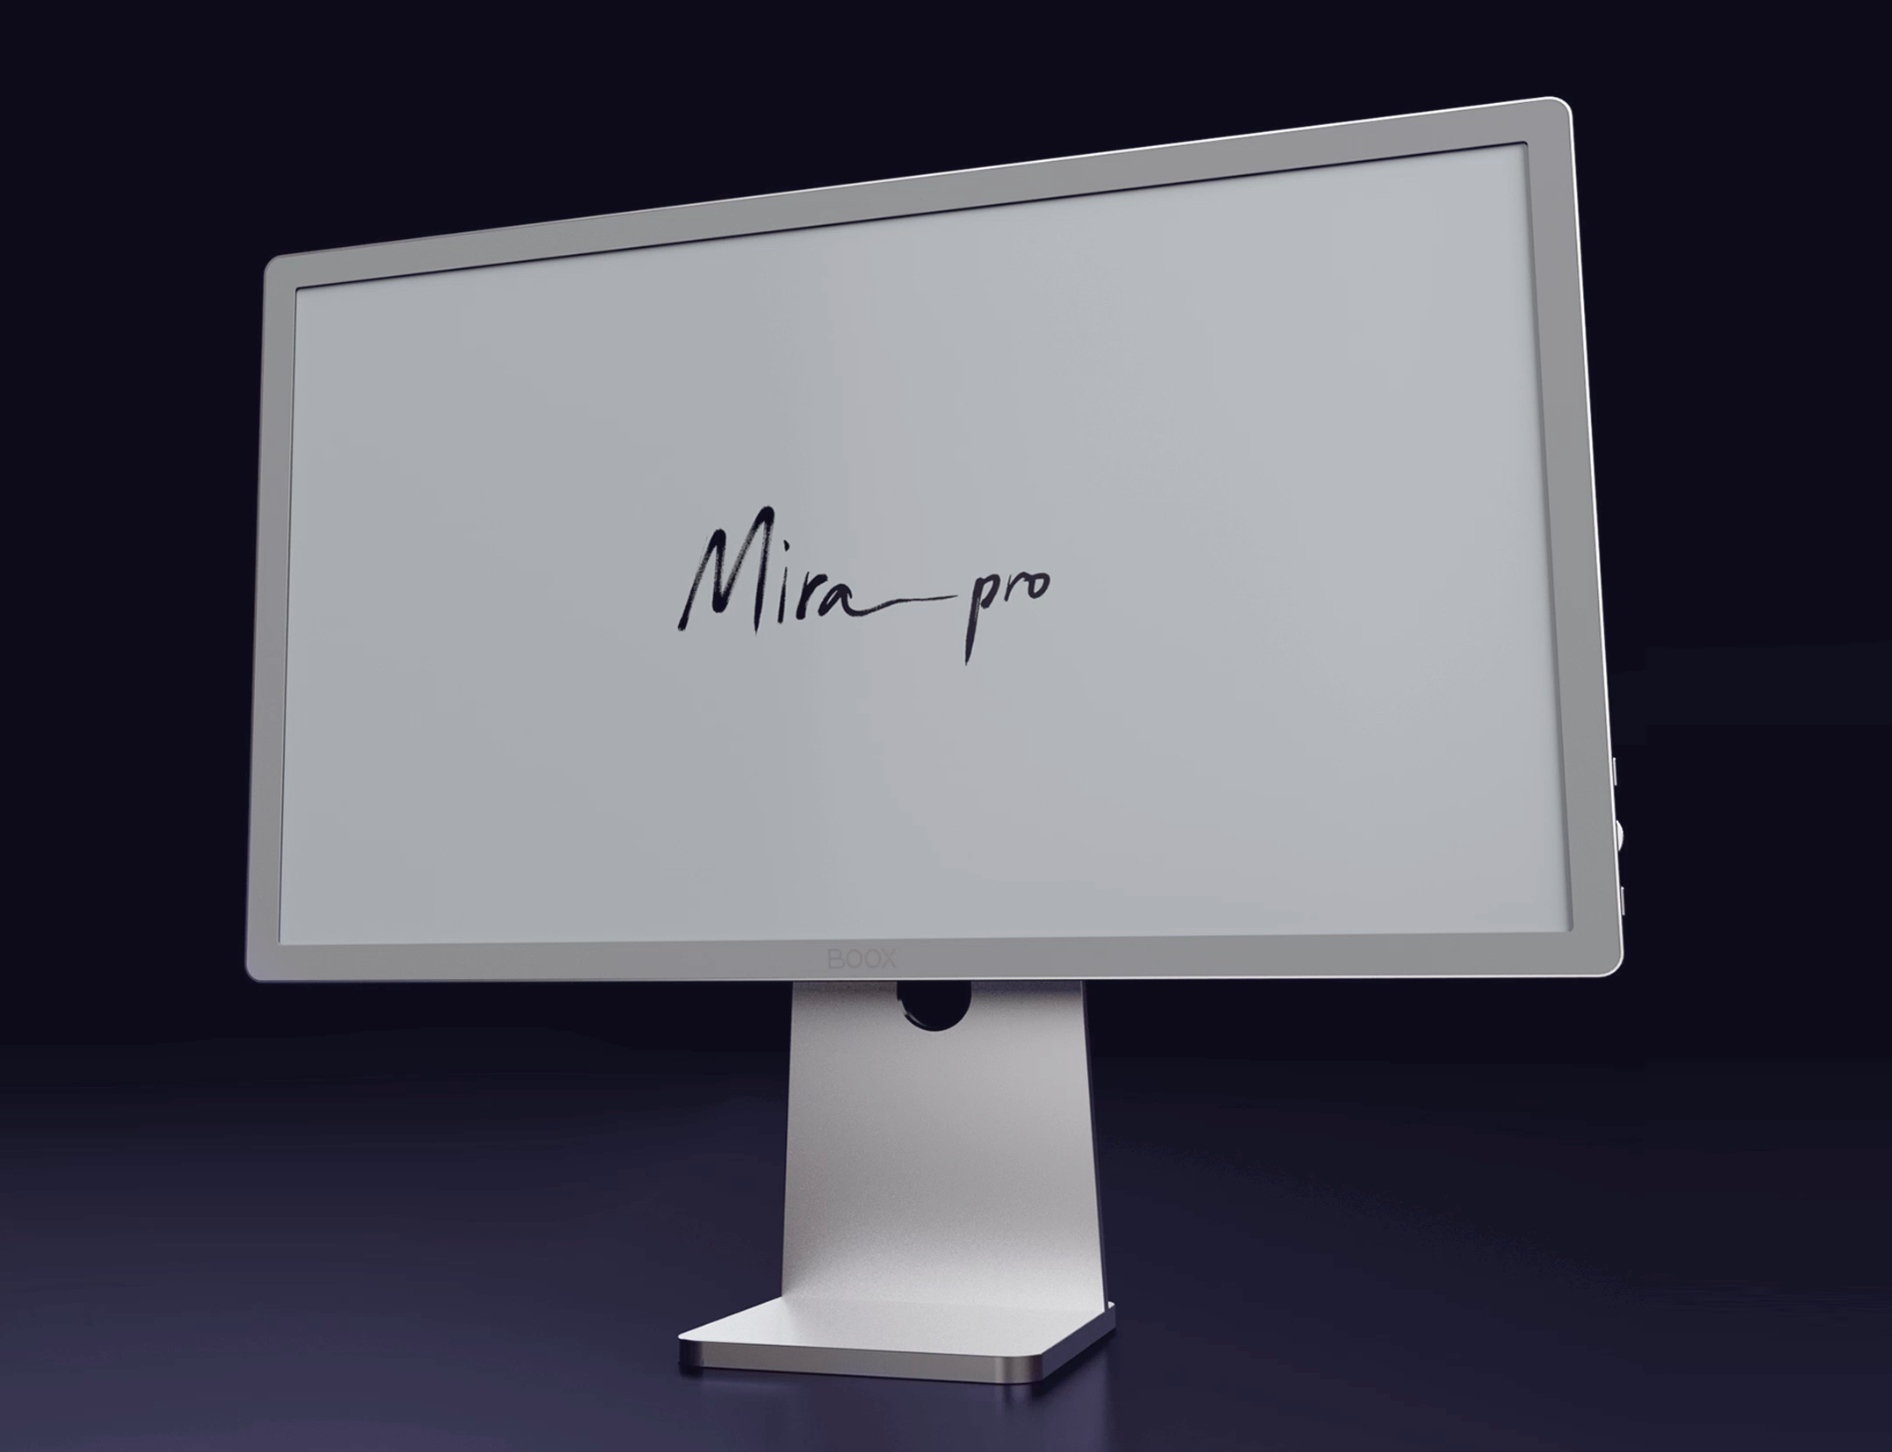 Onyx BOOX Mira Pro: E-ink desktop monitor updated with improved